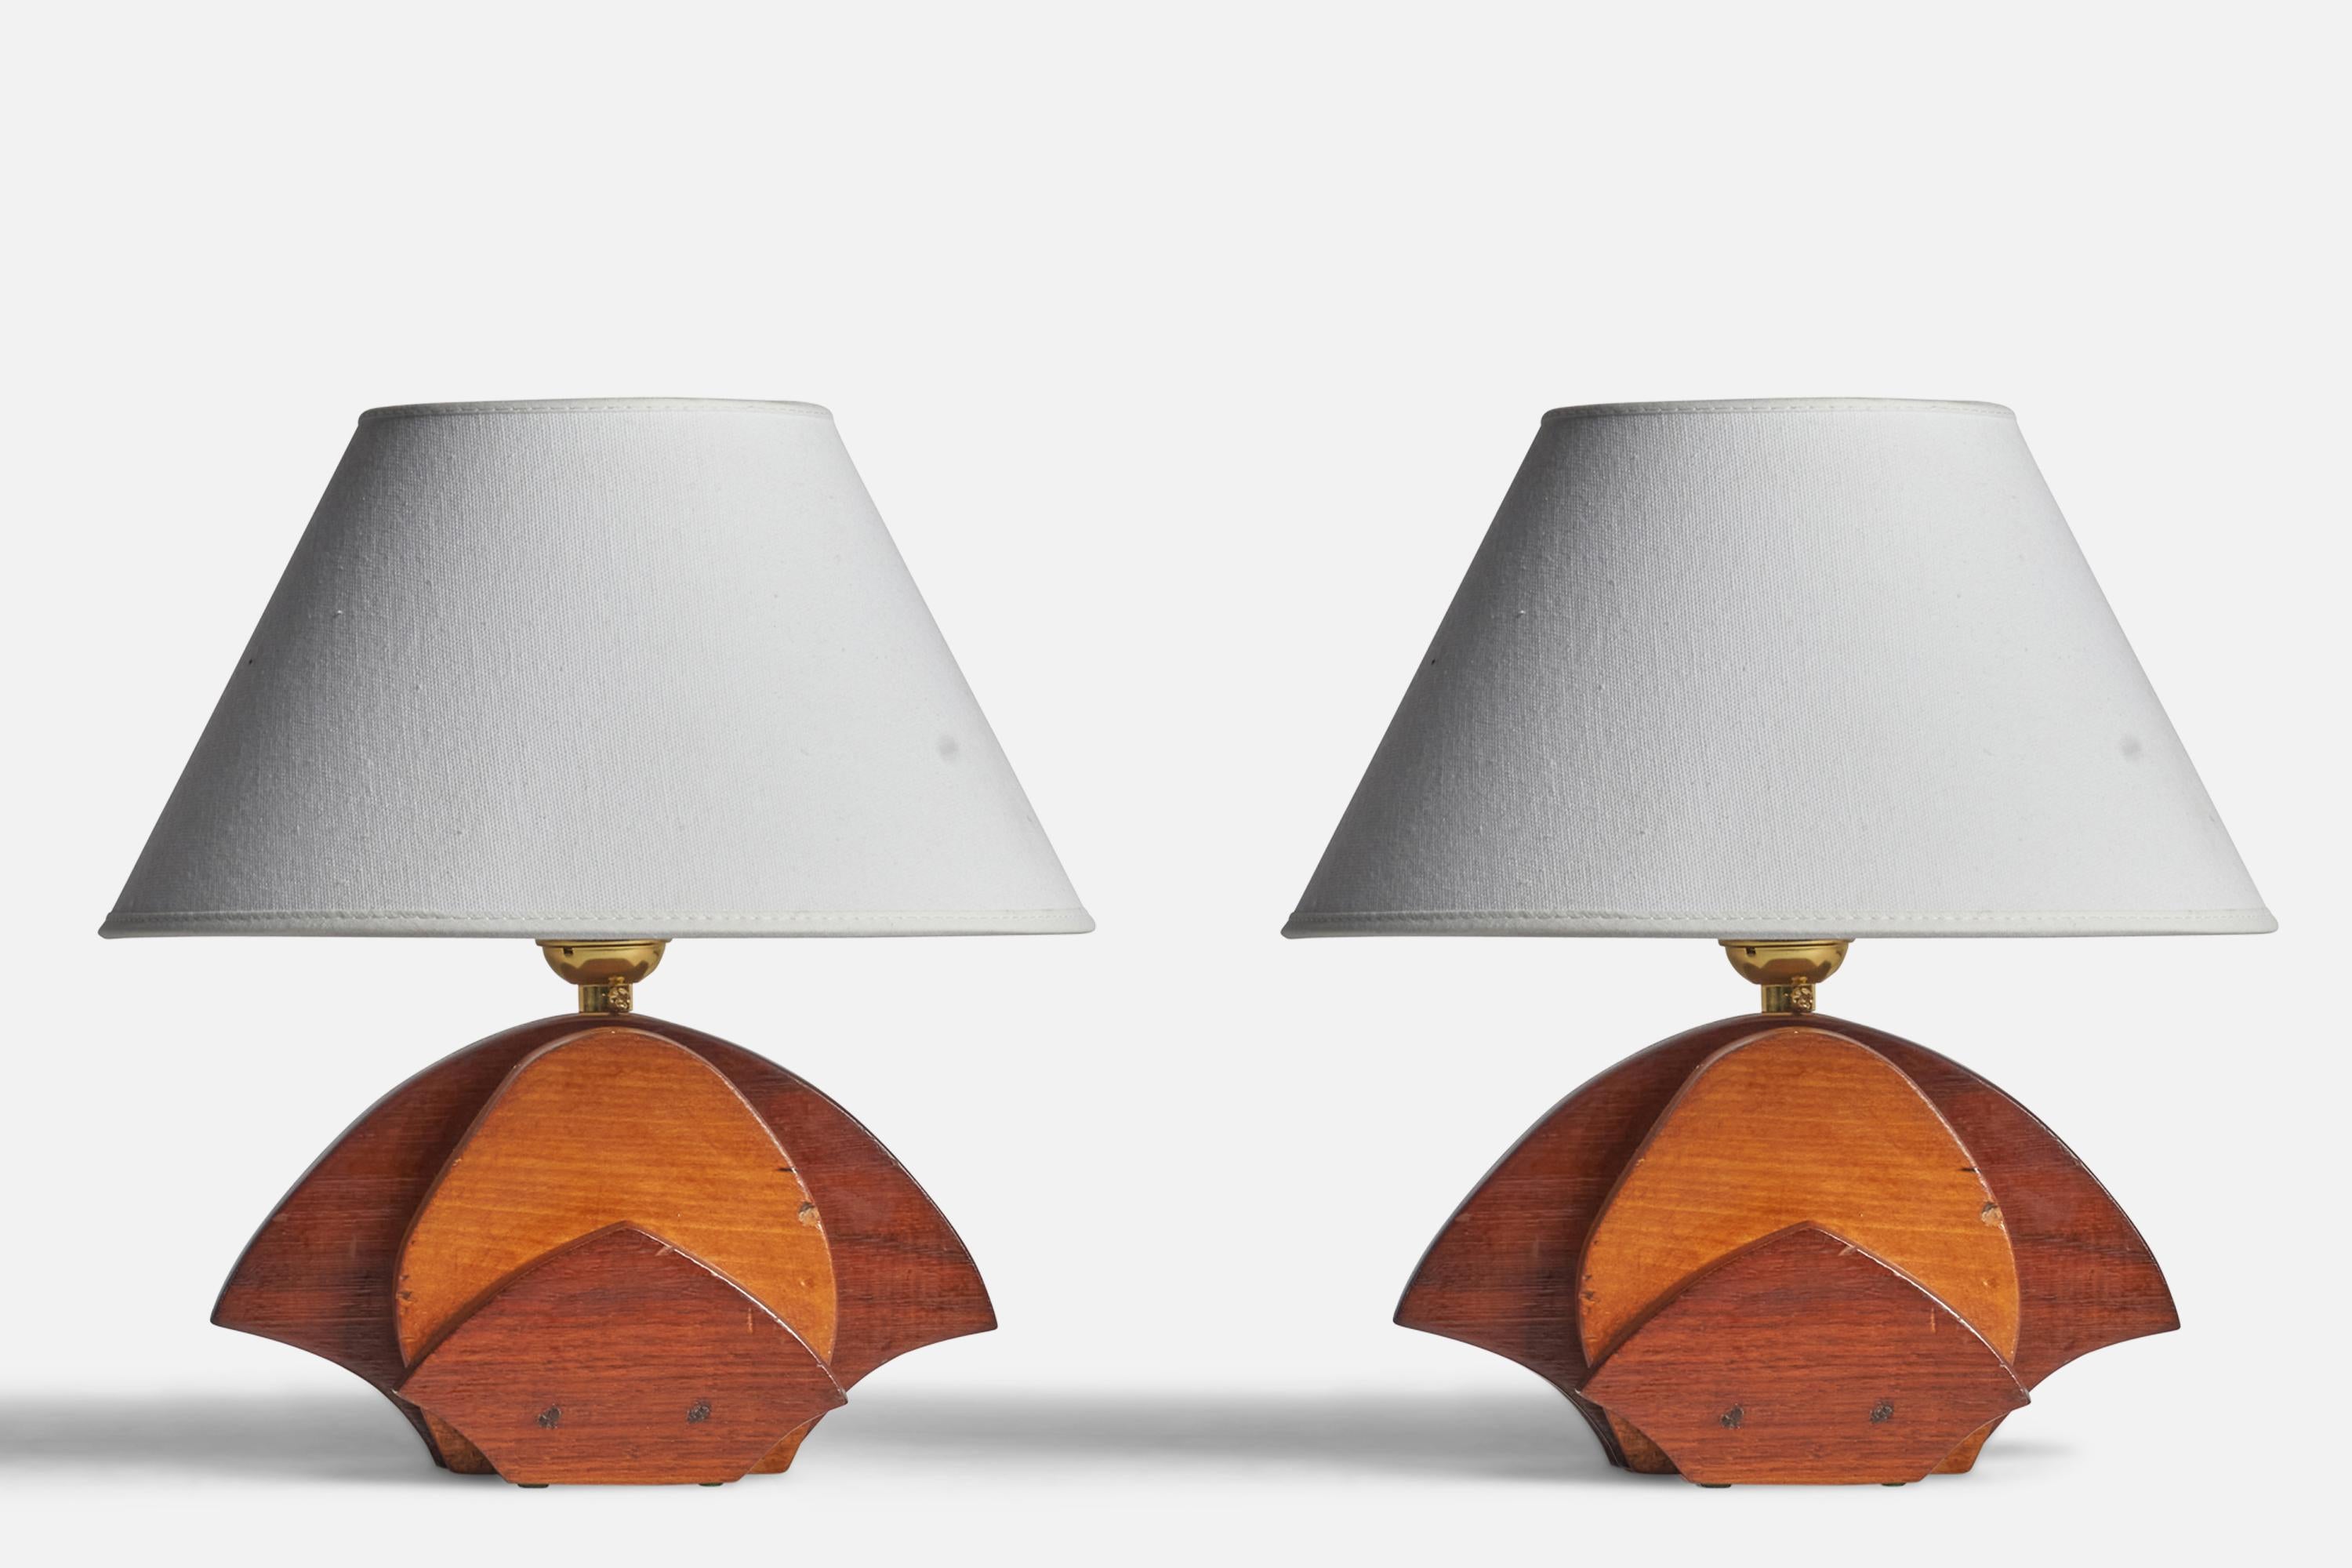 A pair of oak and walnut table lamps designed and produced in the US, c. 1940s.

Dimensions of Lamp (inches): 7.5” H x 8” W x 4.5” D
Dimensions of Shade (inches): 4.5” Top Diameter x 10” Bottom Diameter x 5.25” H 
Dimensions of Lamp with Shade